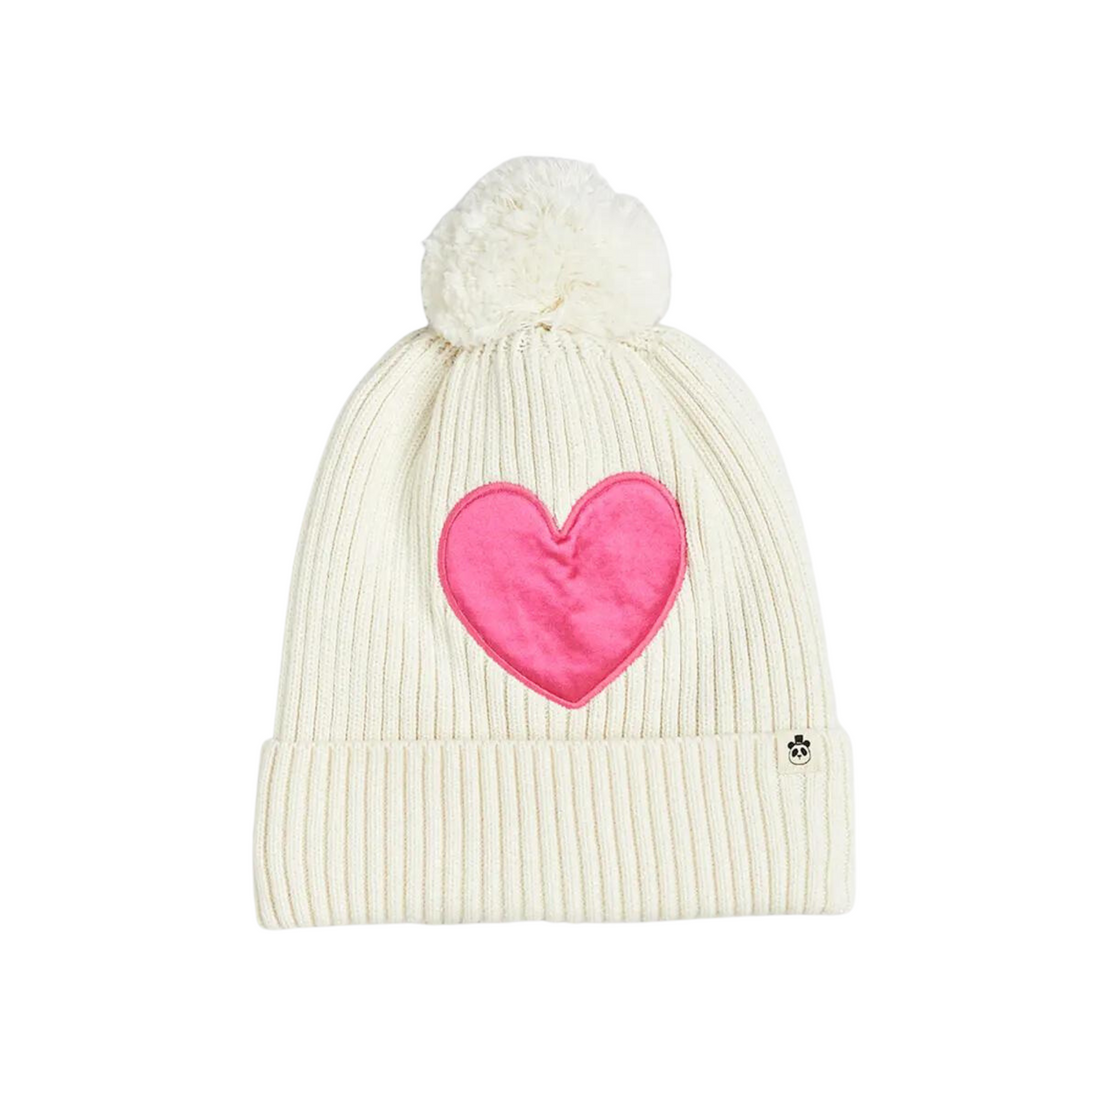 Knitted hat - Hearts